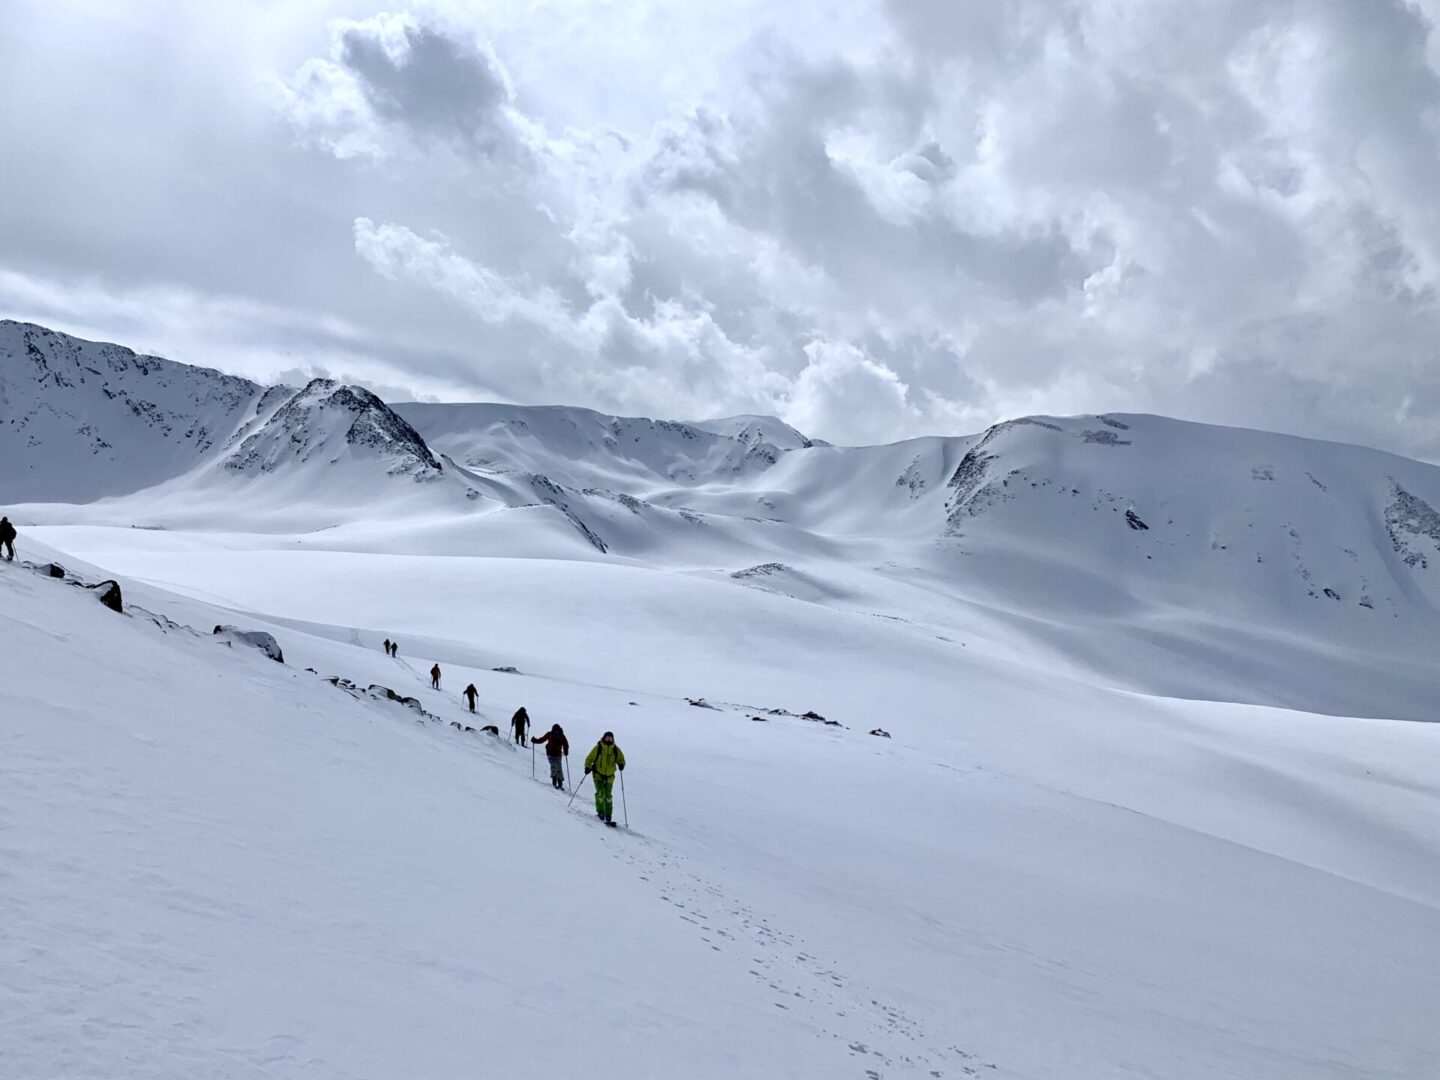 A group of people hiking on a snowy mountain